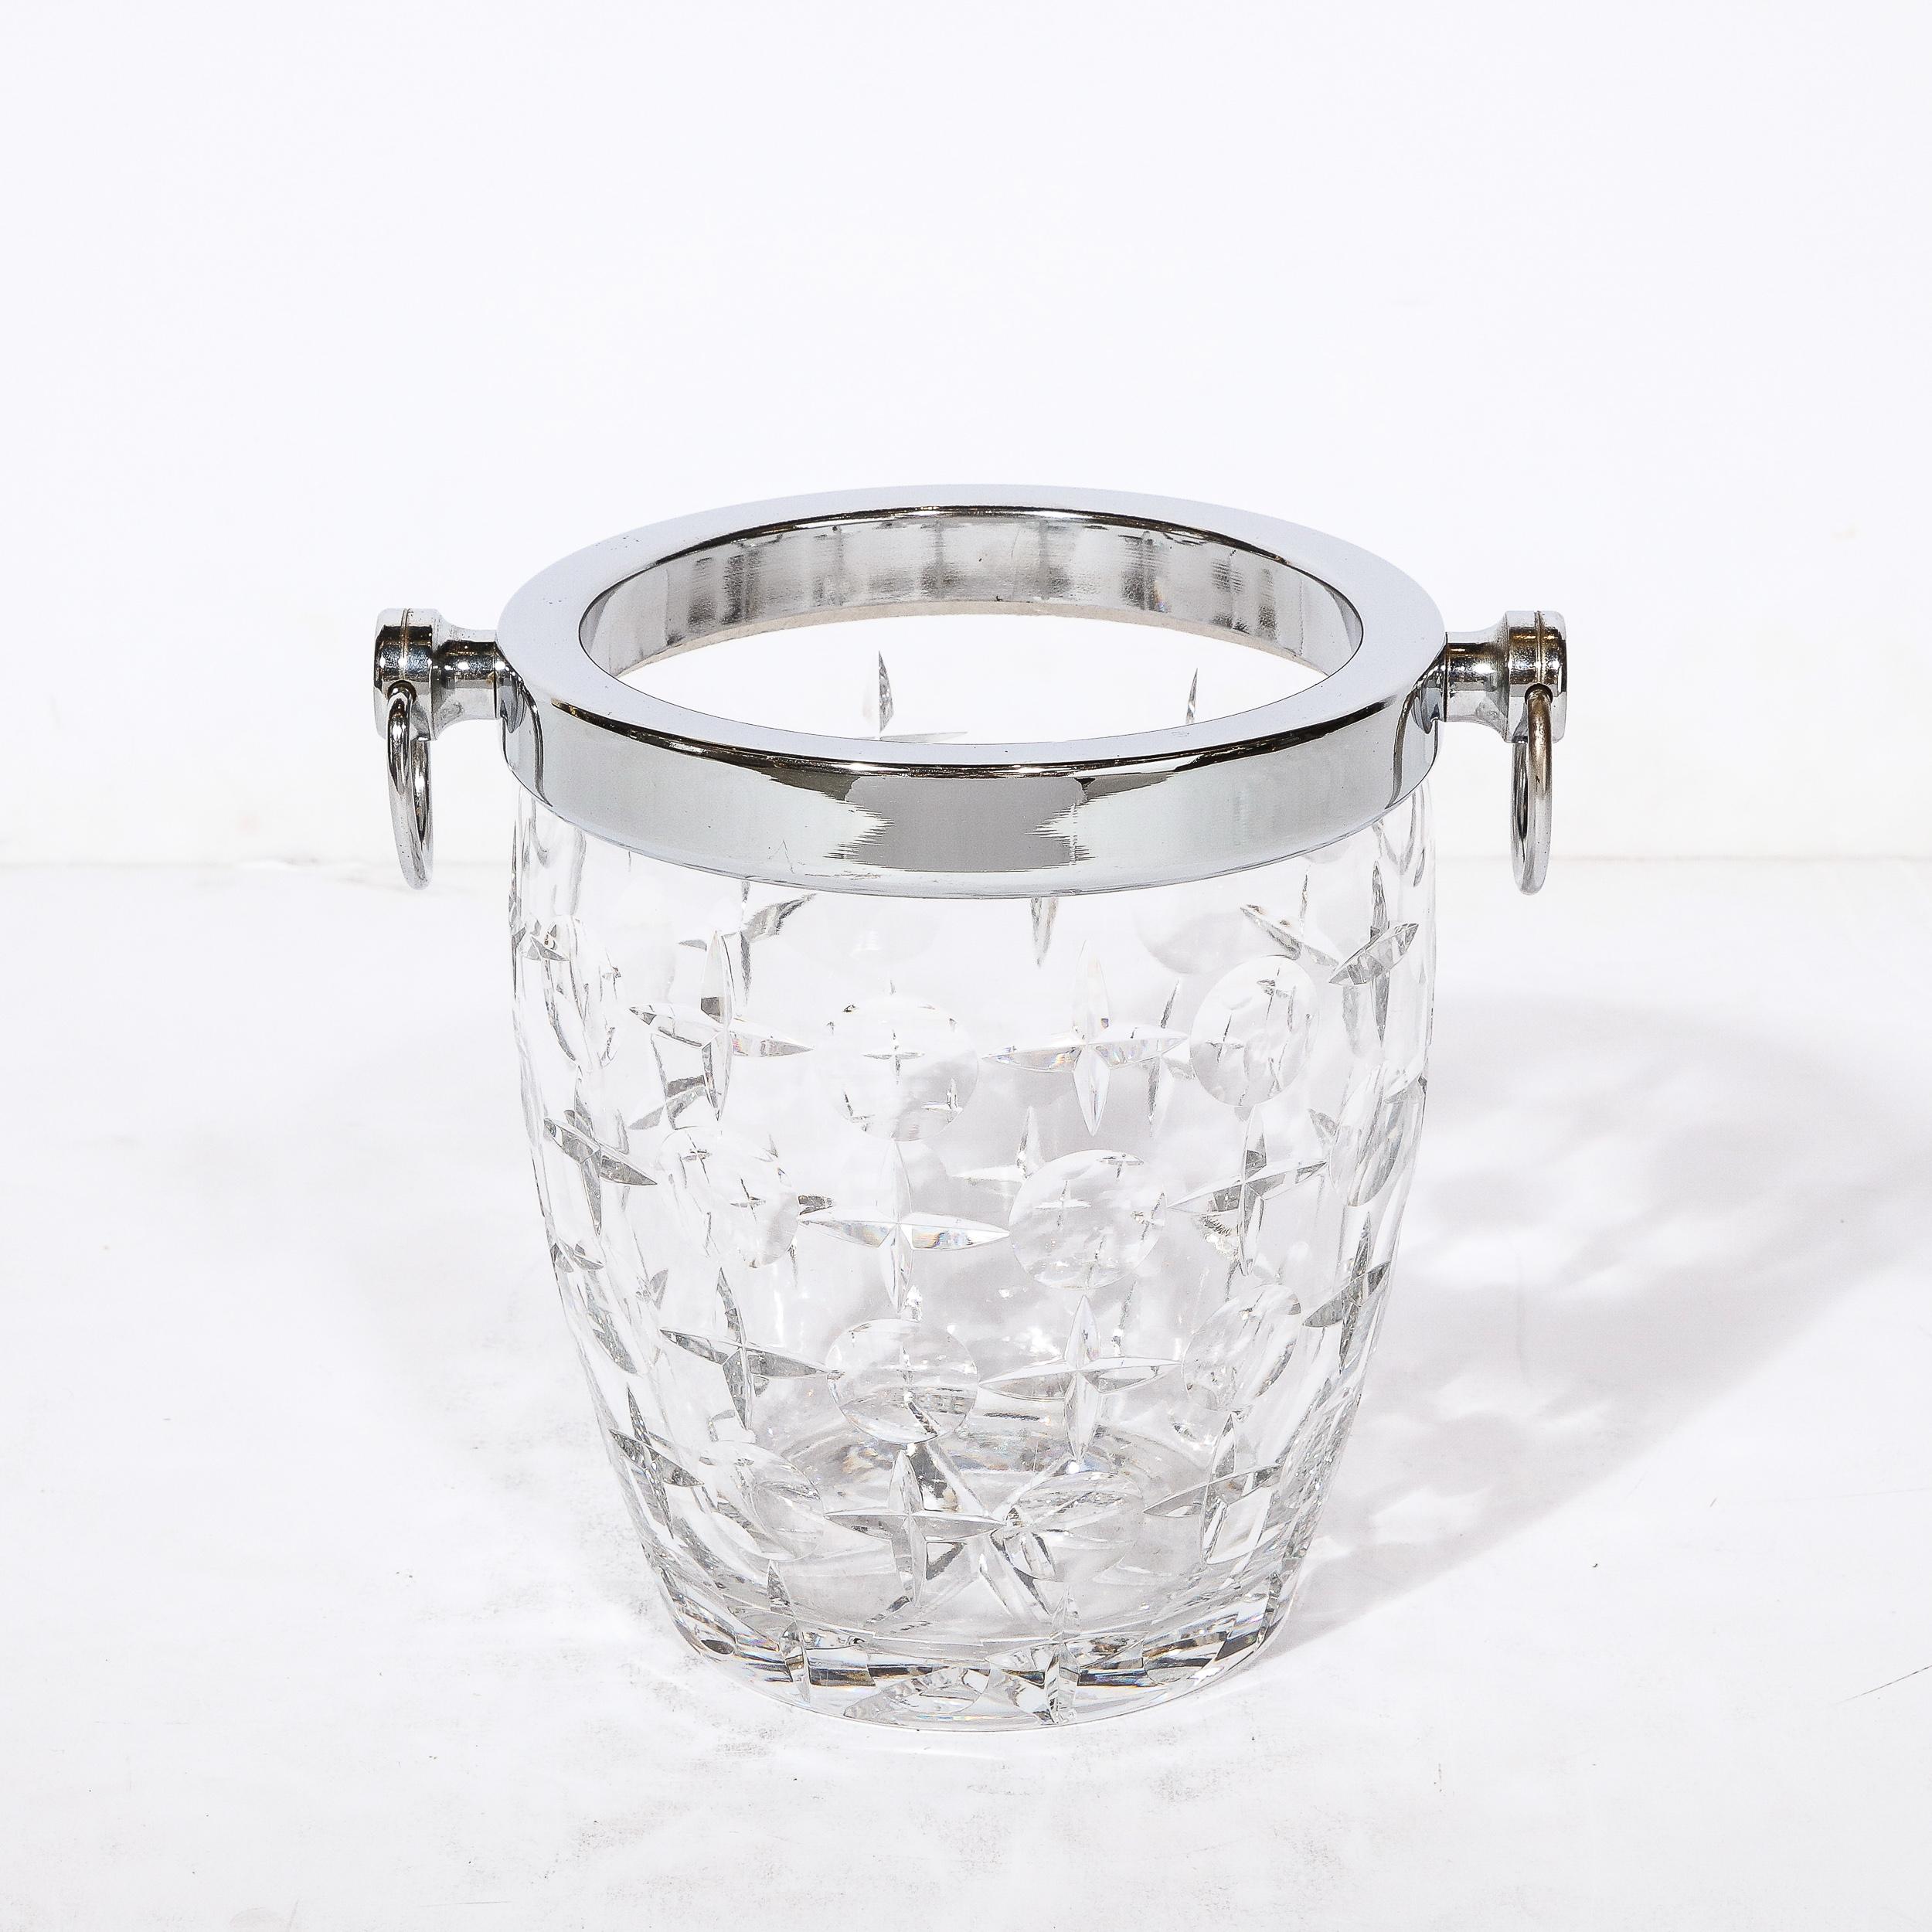 This bold and glamorous Mid-Century Modernist Cut Crystal Ice Bucket Originates from France, Circa 1950. Featuring a rim and handles rendered in polished chrome, the body of the ice bucket is made entirely of Cut Crystal with star form patterning